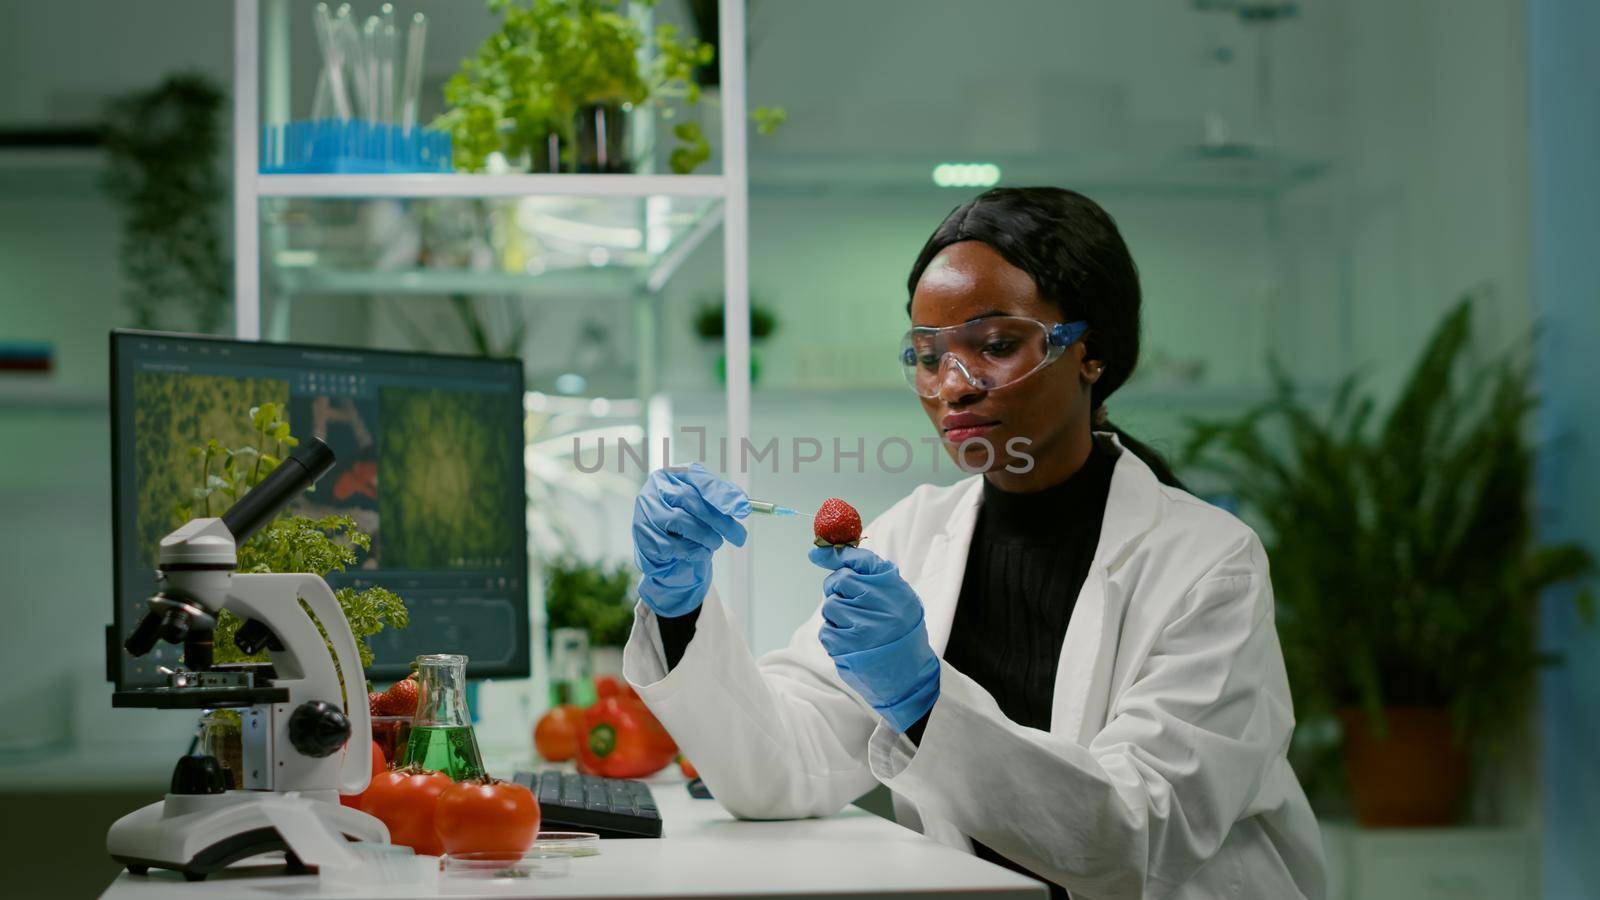 Chemist scientist injecting strawberry with organic liquid examining dna test of fruits for botany experiment. Biochemist working in pharmaceutical laboratory testing health food for medical expertise